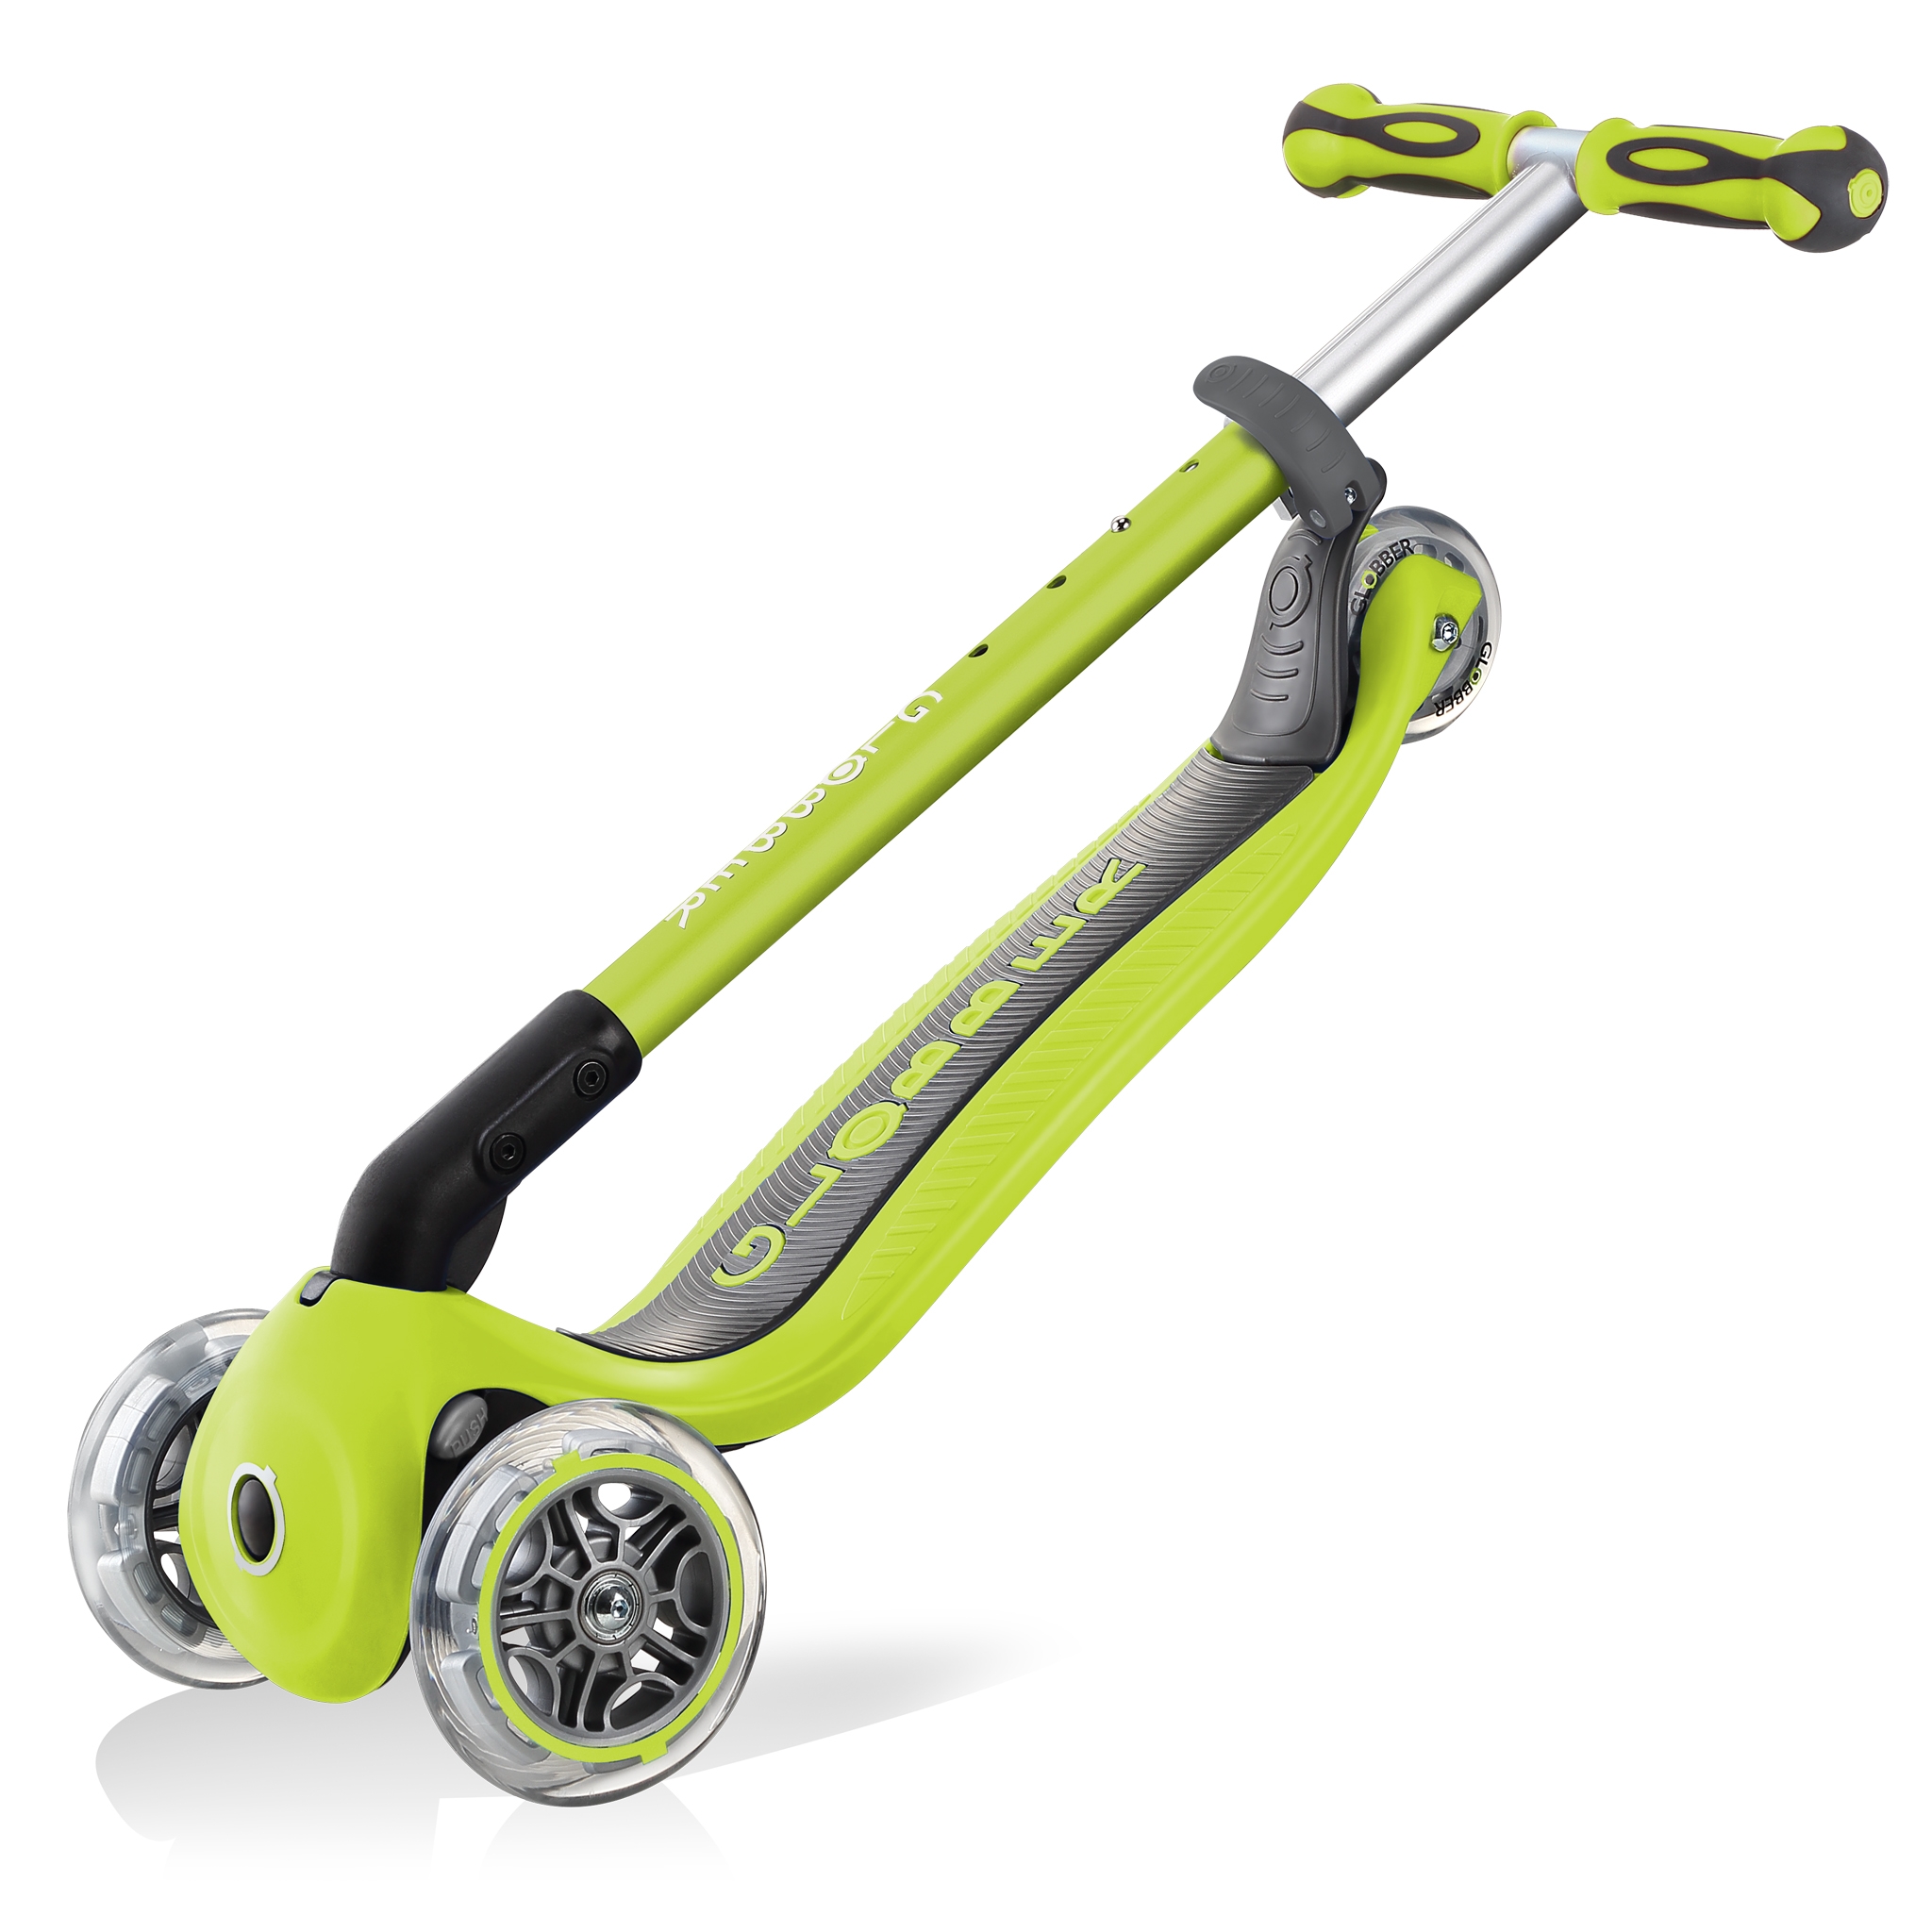 GO-UP-DELUXE-ride-on-walking-bike-scooter-trolley-mode-compatible-lime-green 5